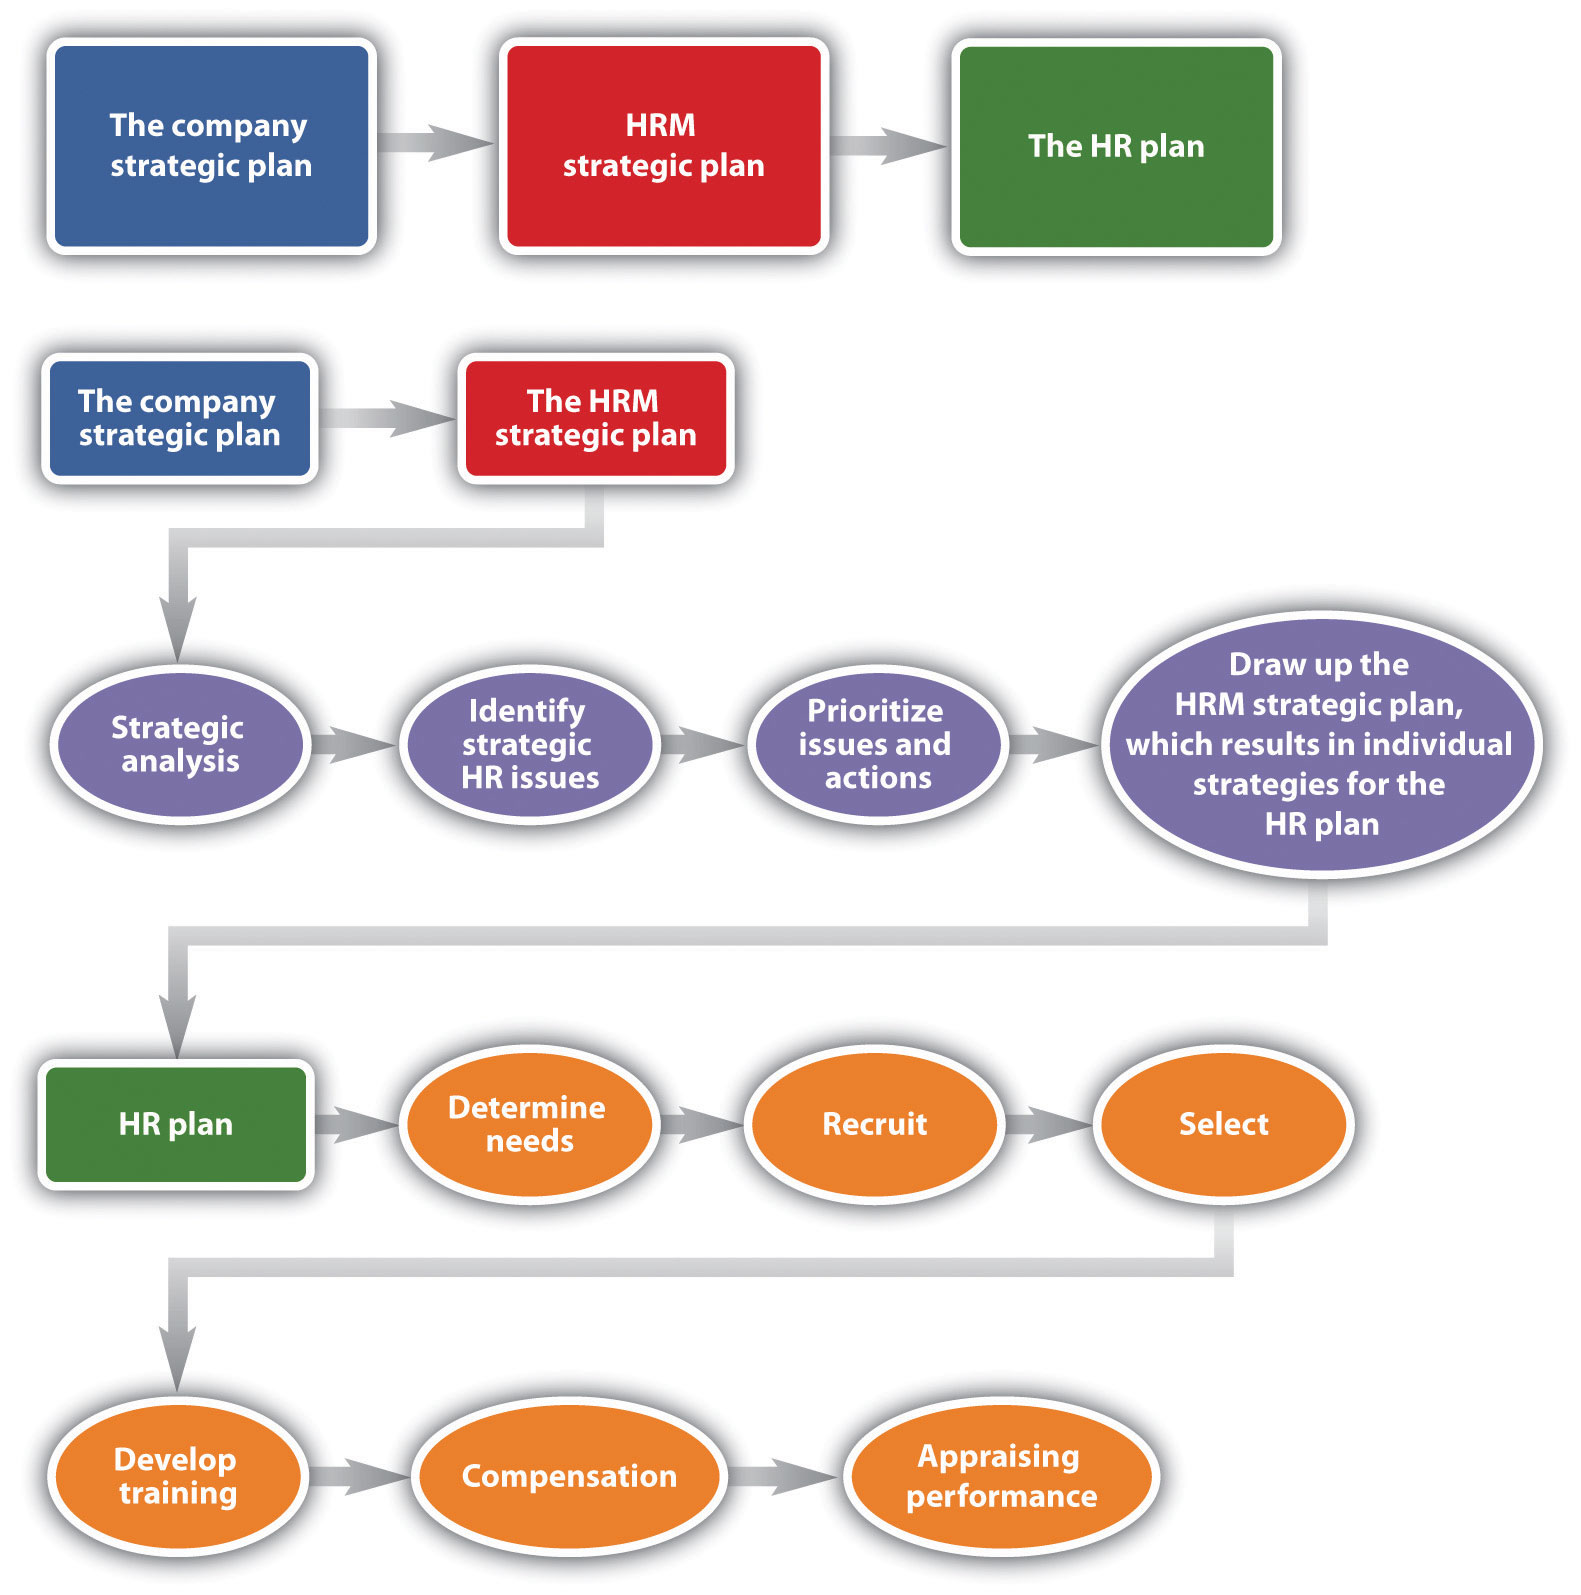 As you can see from this figure, the company strategic plan ties into the HRM strategic plan, and from the HRM strategic plan, the HR plan can be developed